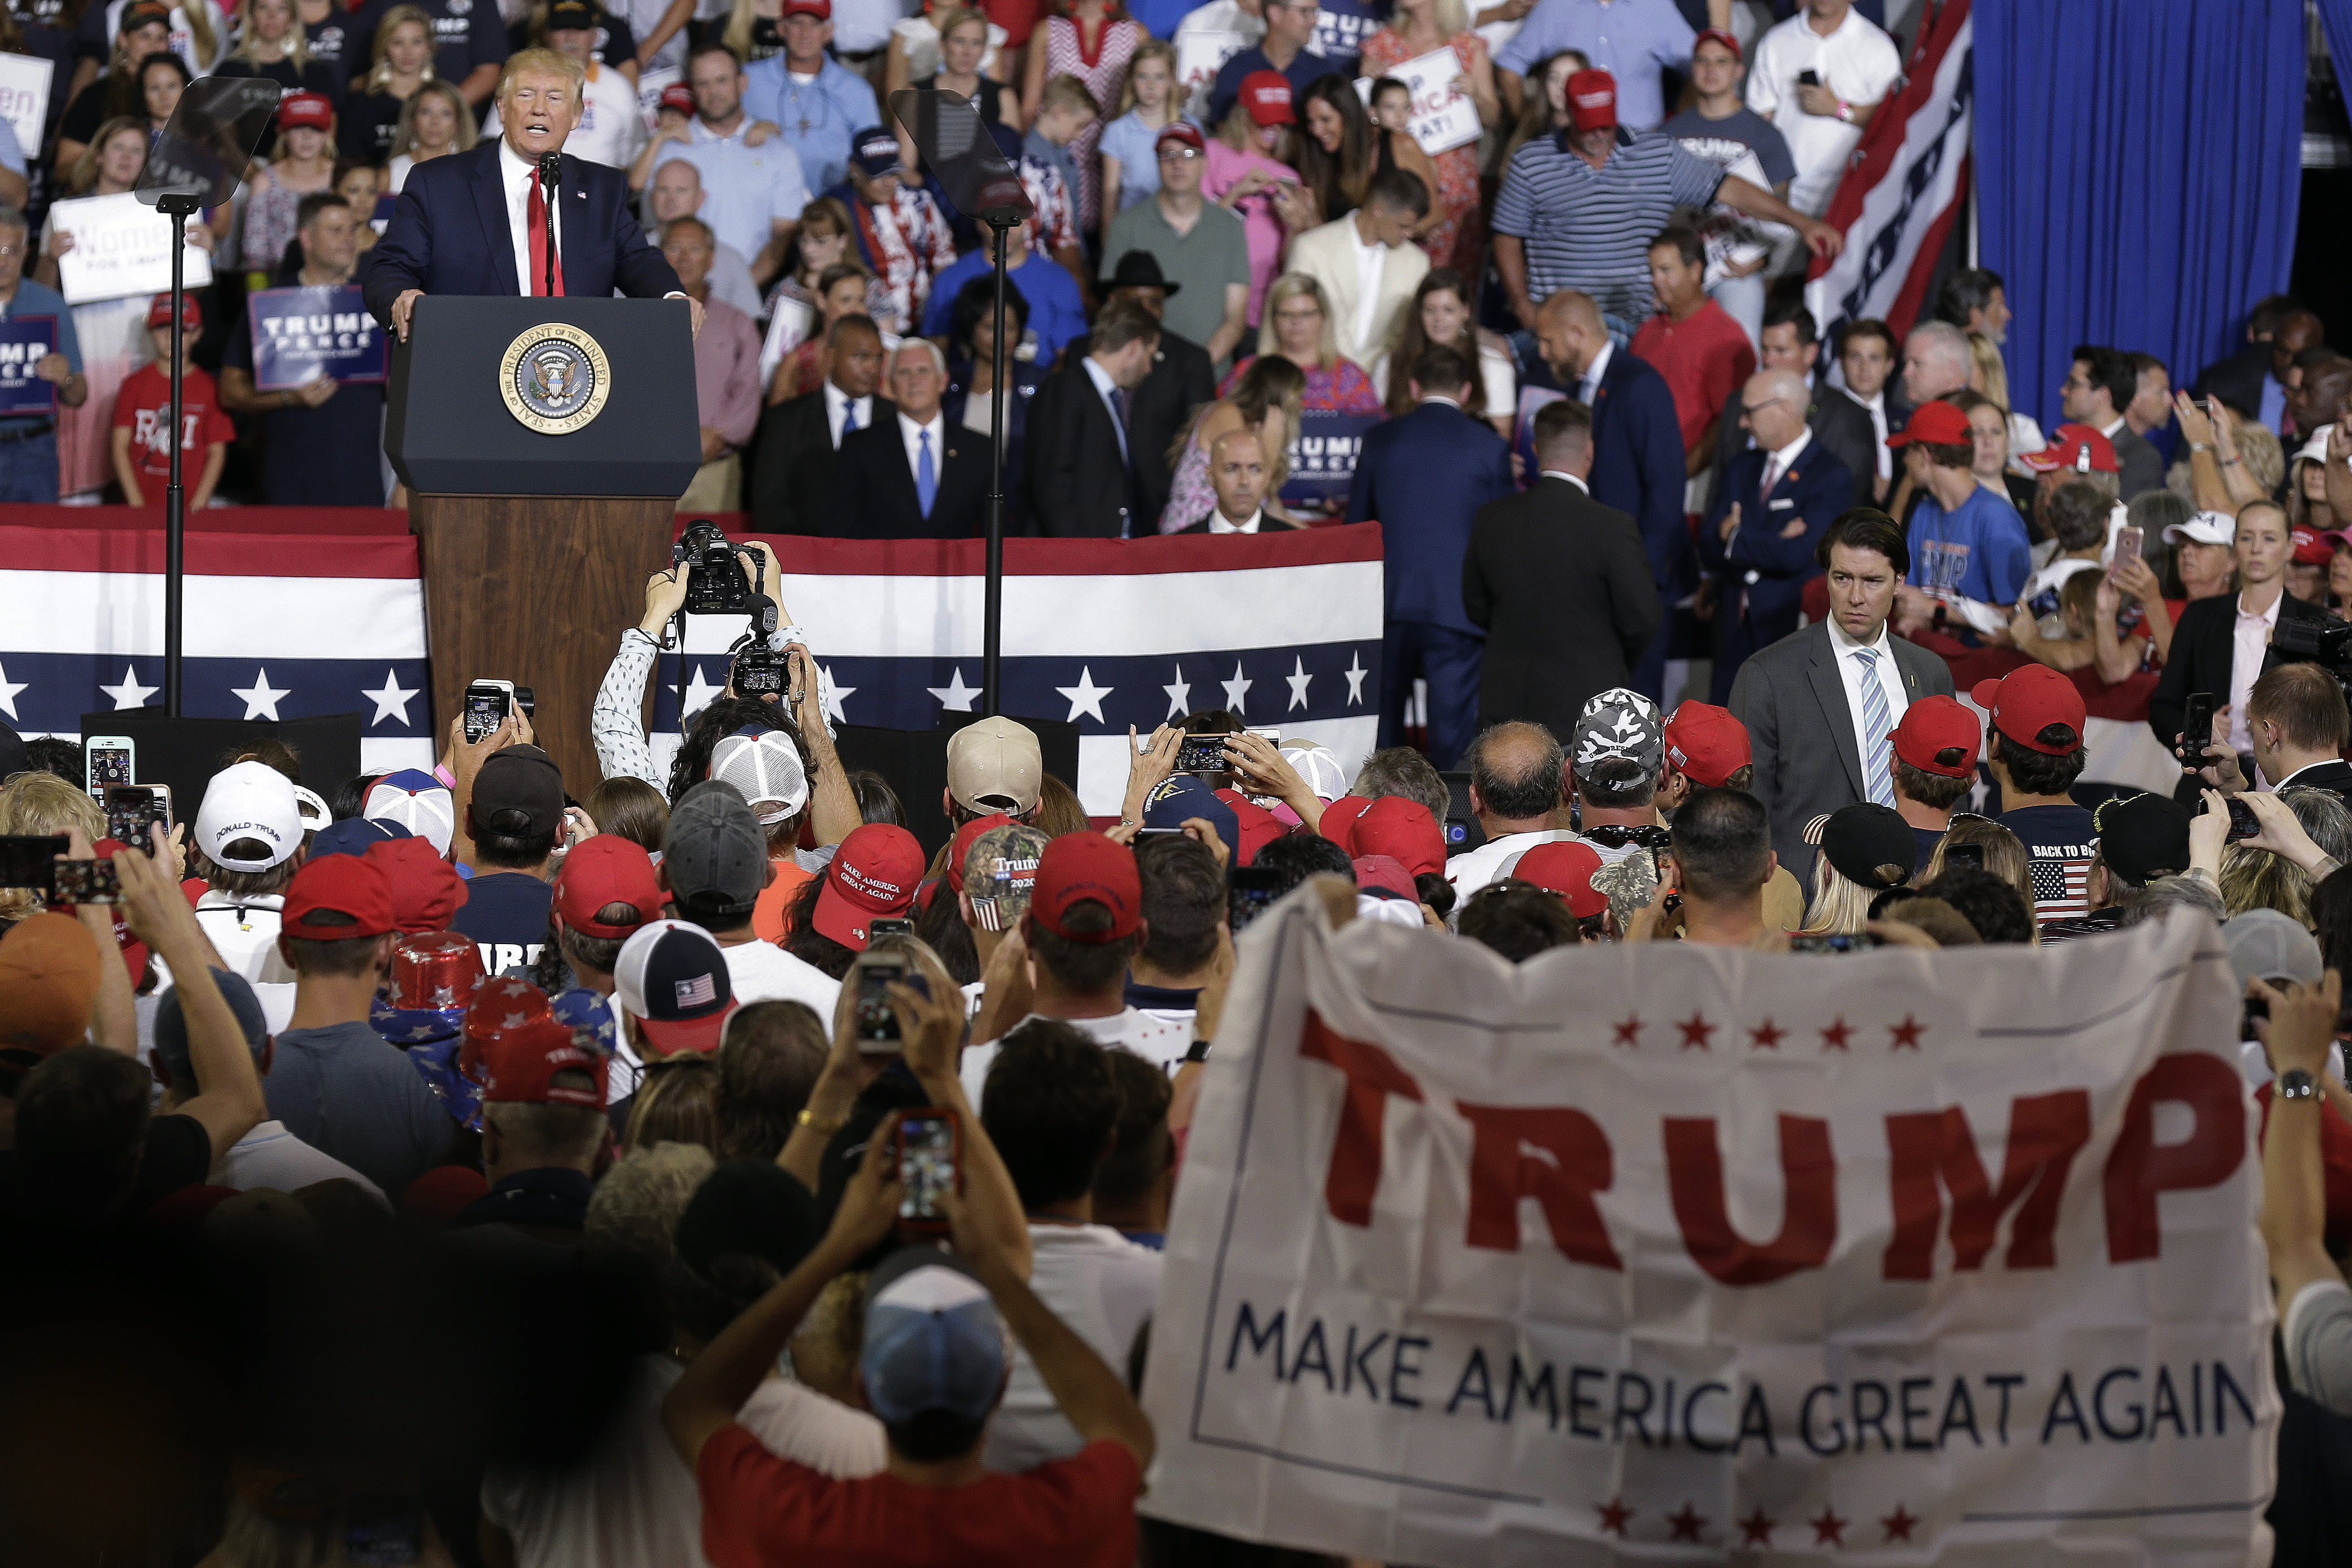 Trump 'felt a little badly' about 'send her back' chants at rally